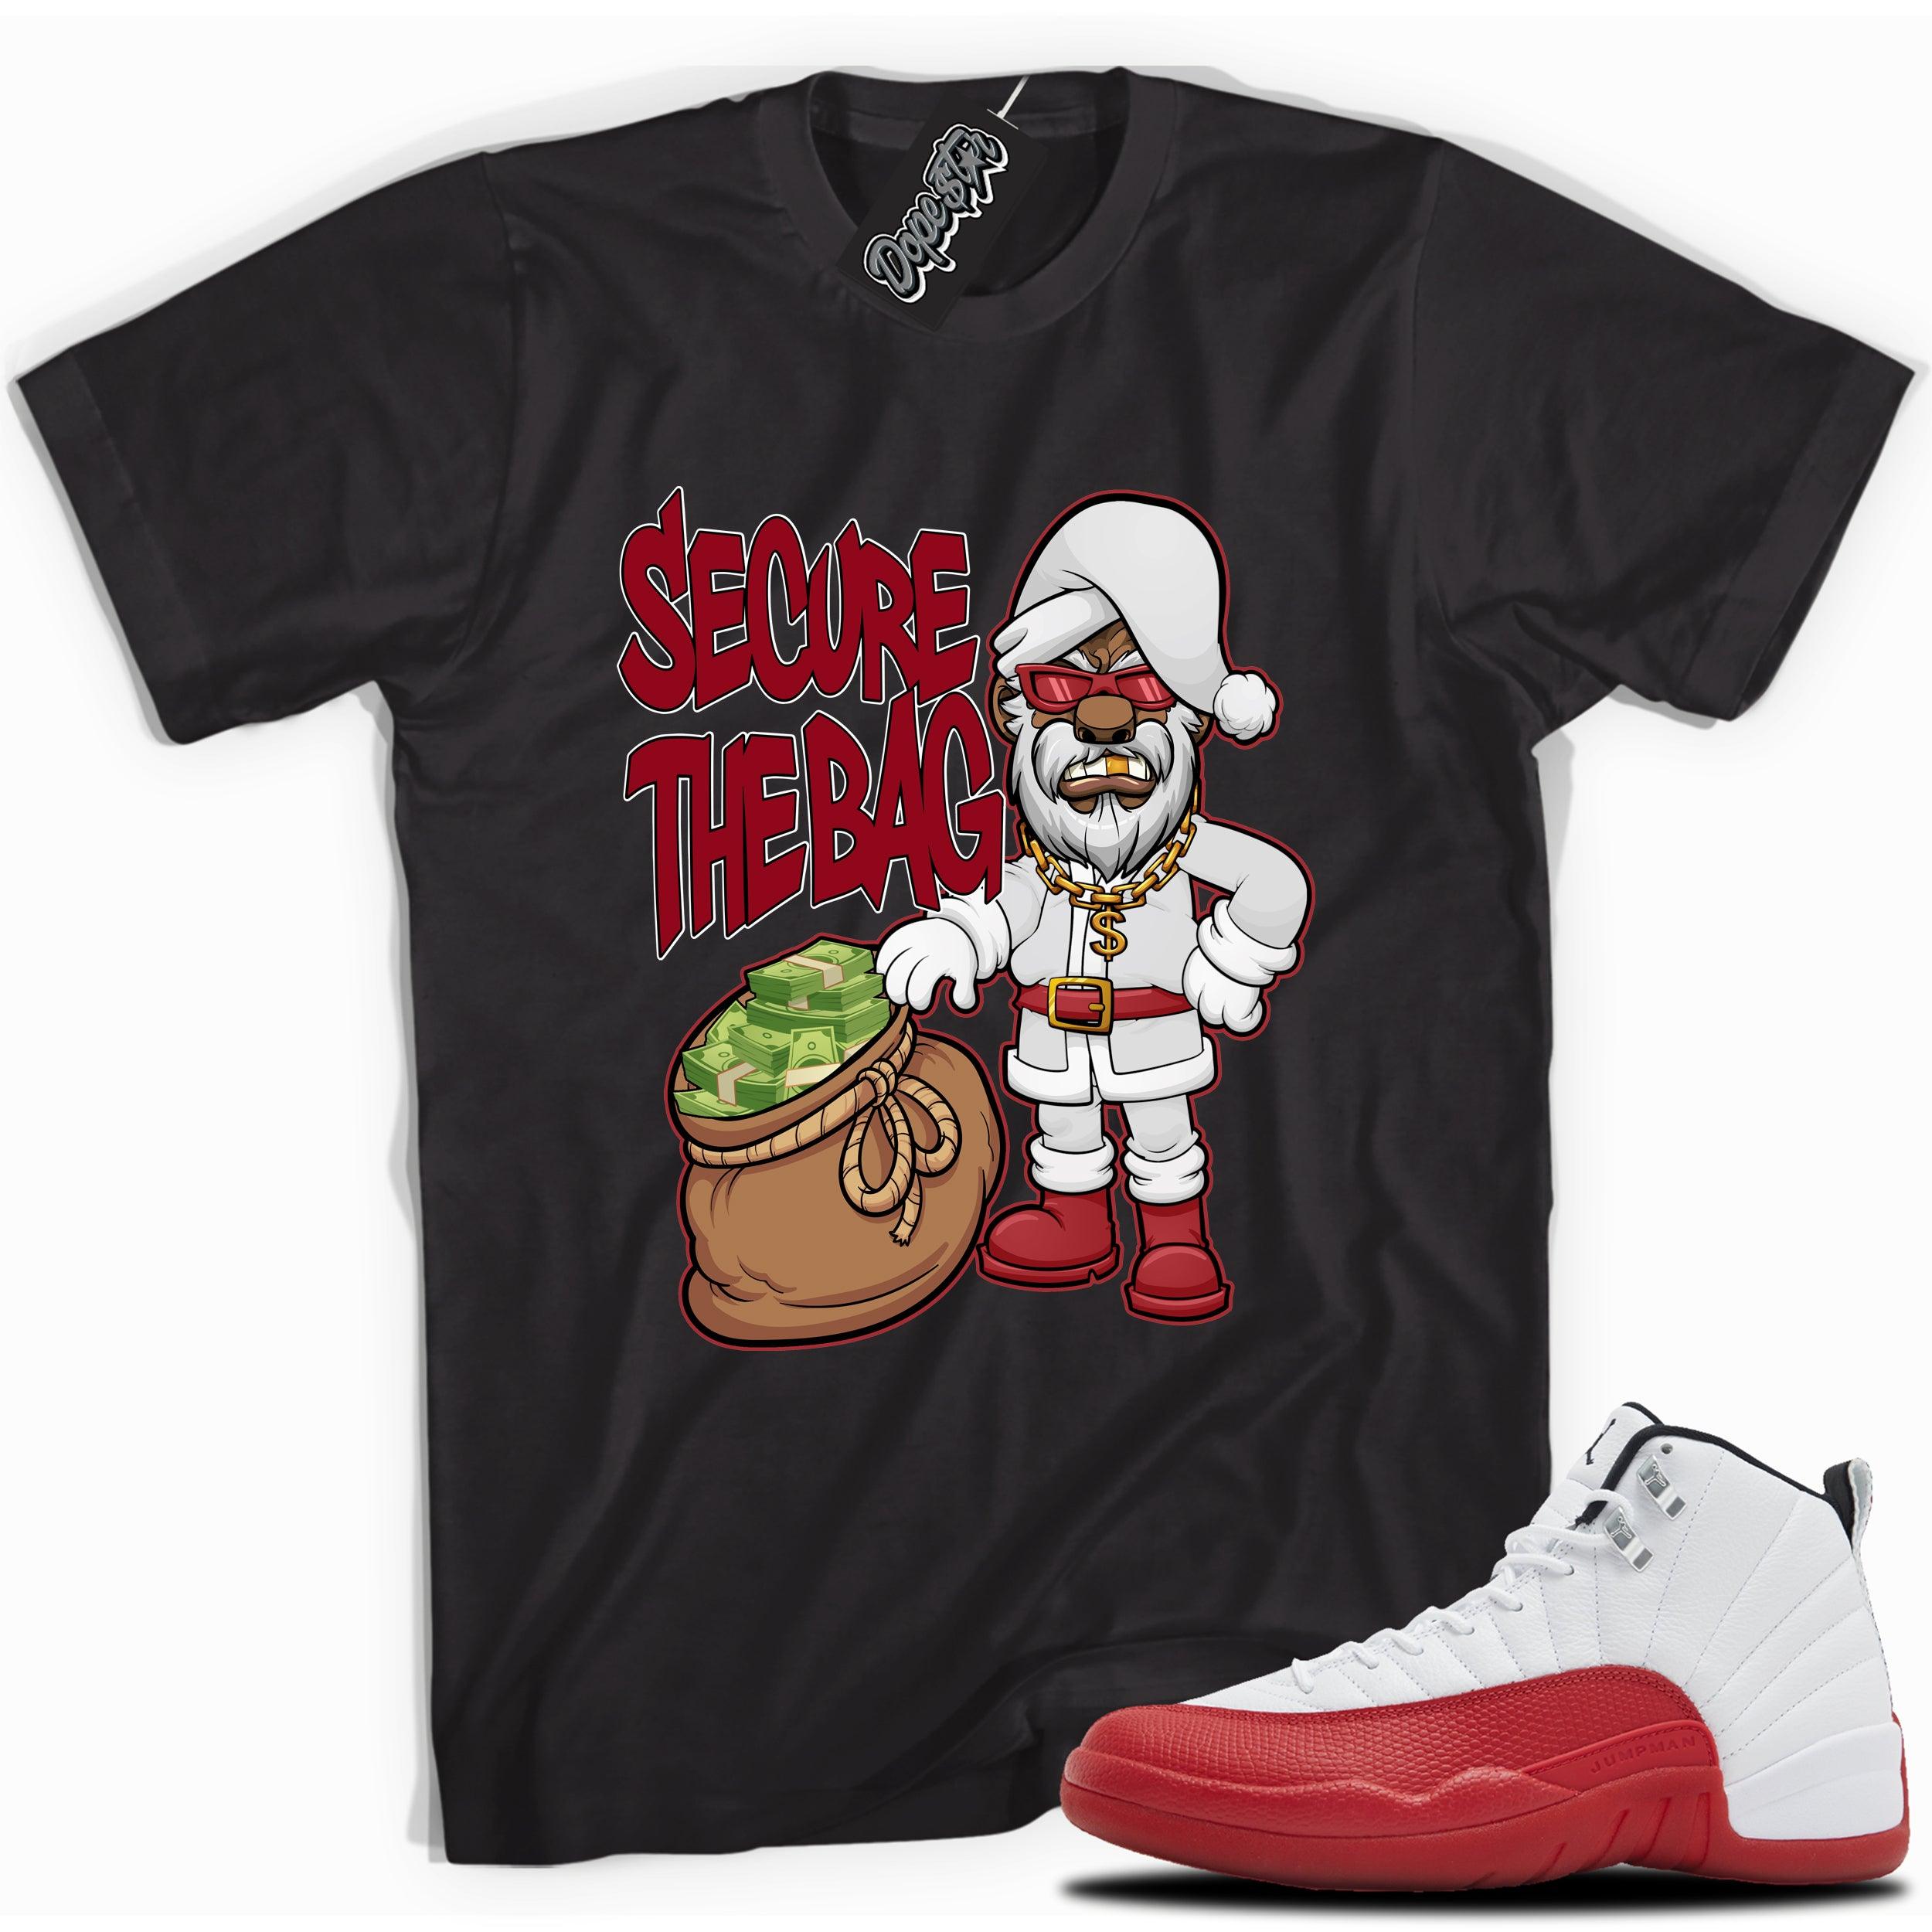 Cool Black graphic tee with “Secure The Bag Santa” print, that perfectly matches Air Jordan 12 Retro Cherry Red 2023 red and white sneakers 